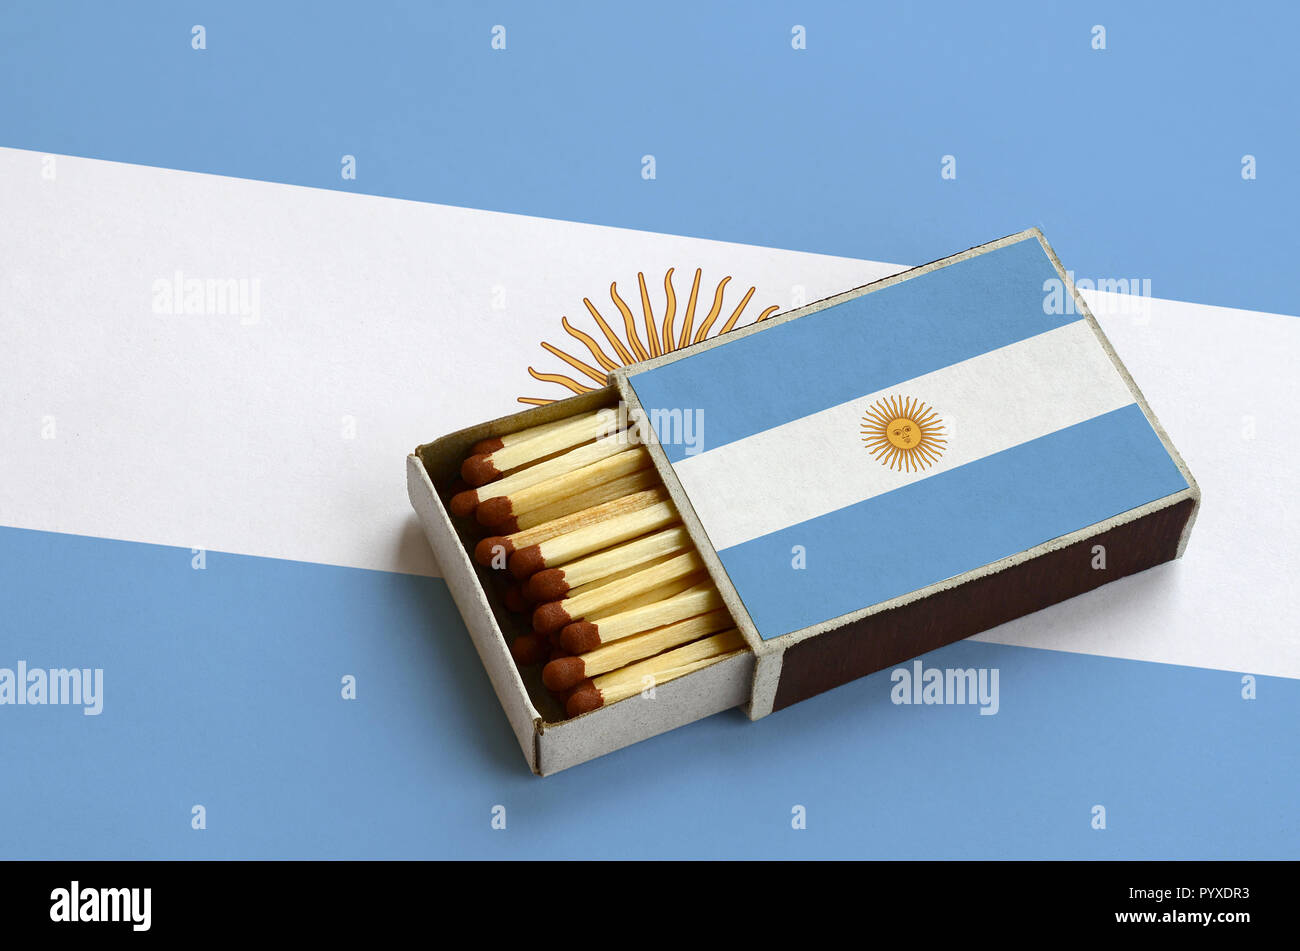 Argentina flag  is shown in an open matchbox, which is filled with matches and lies on a large flag. Stock Photo